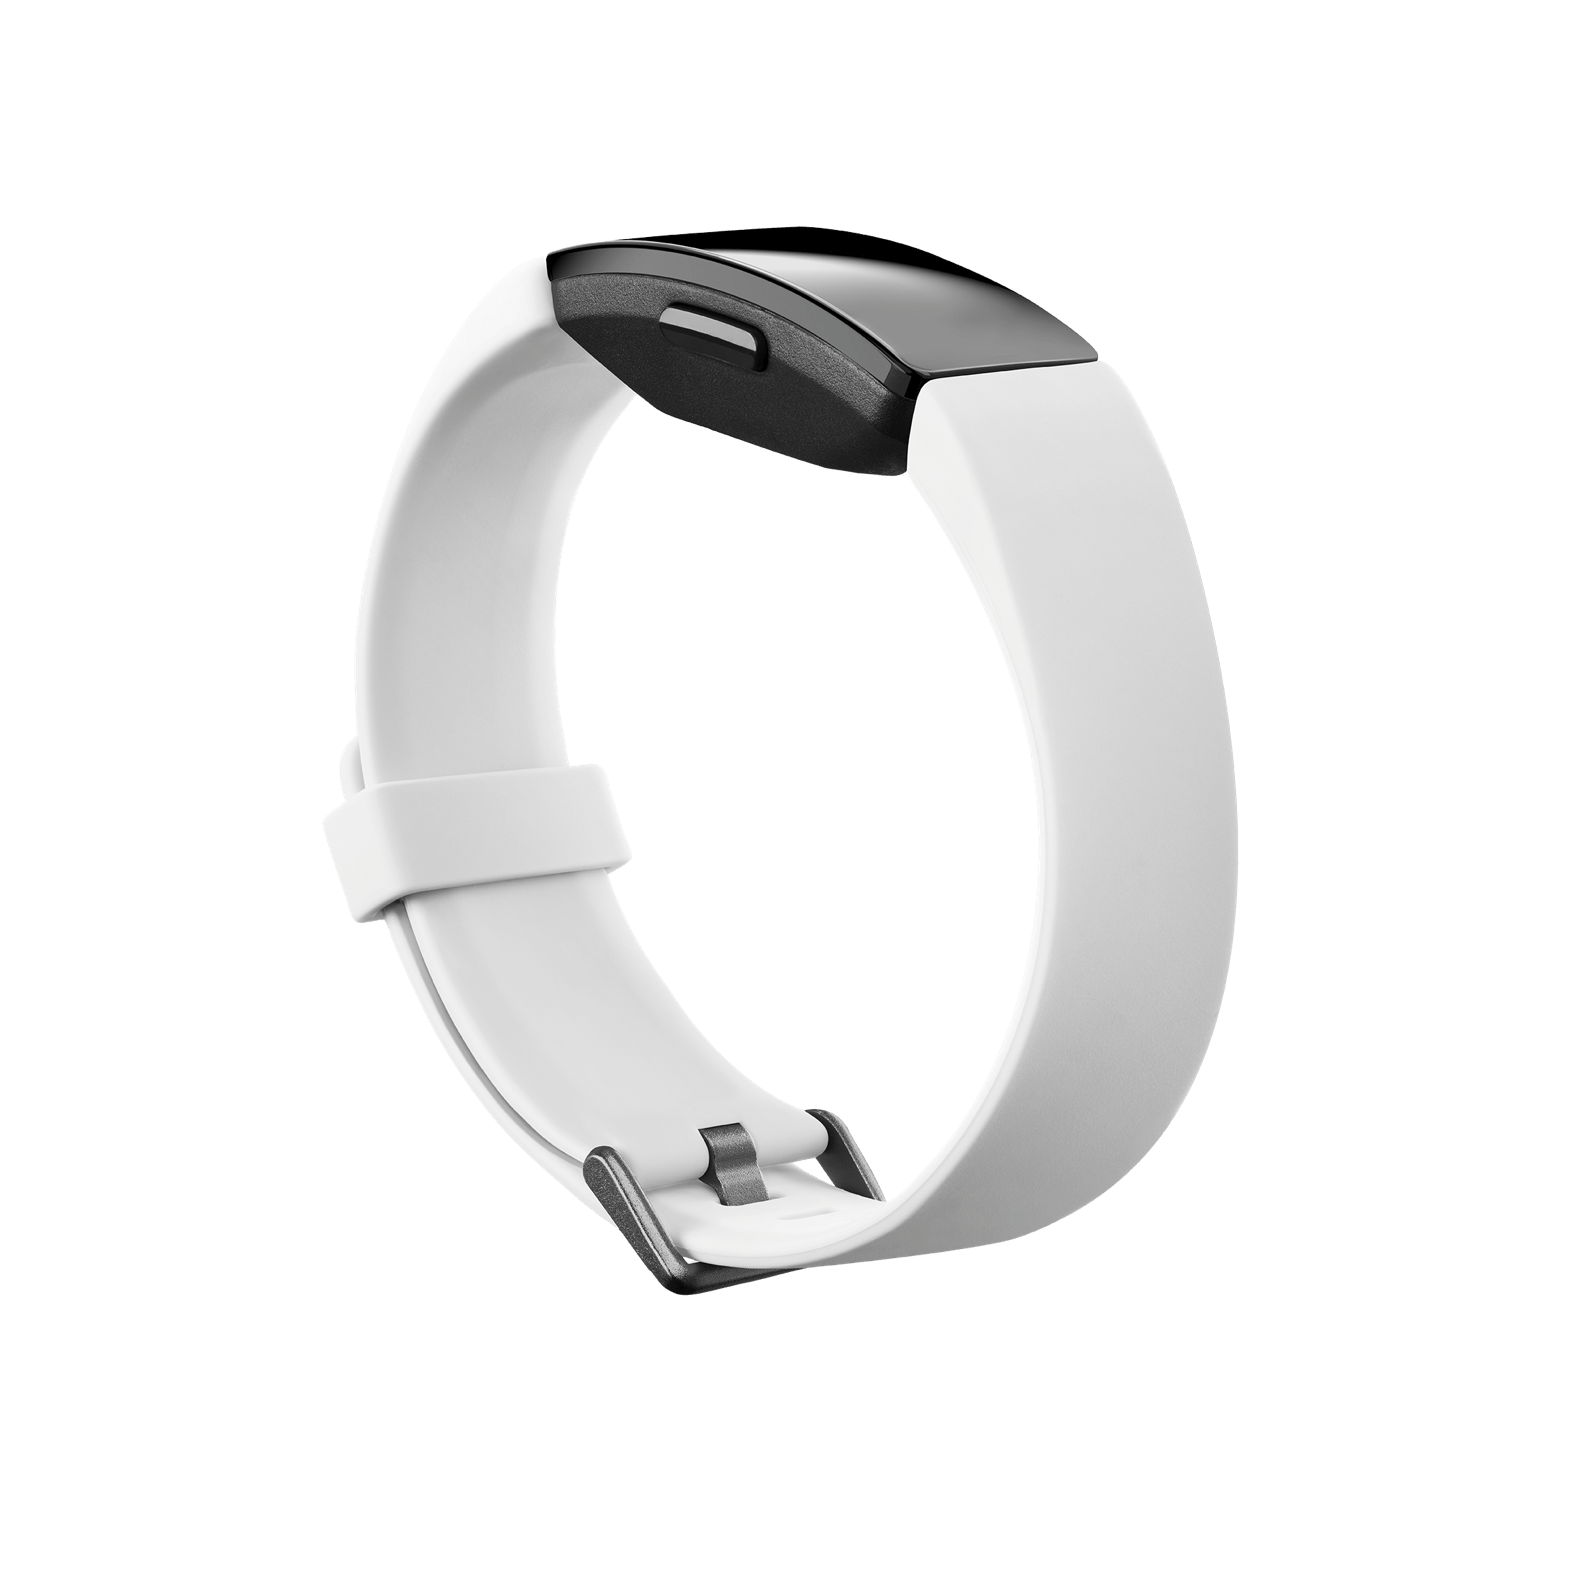 Inspire & Inspire HR Classic Band (White) - Small